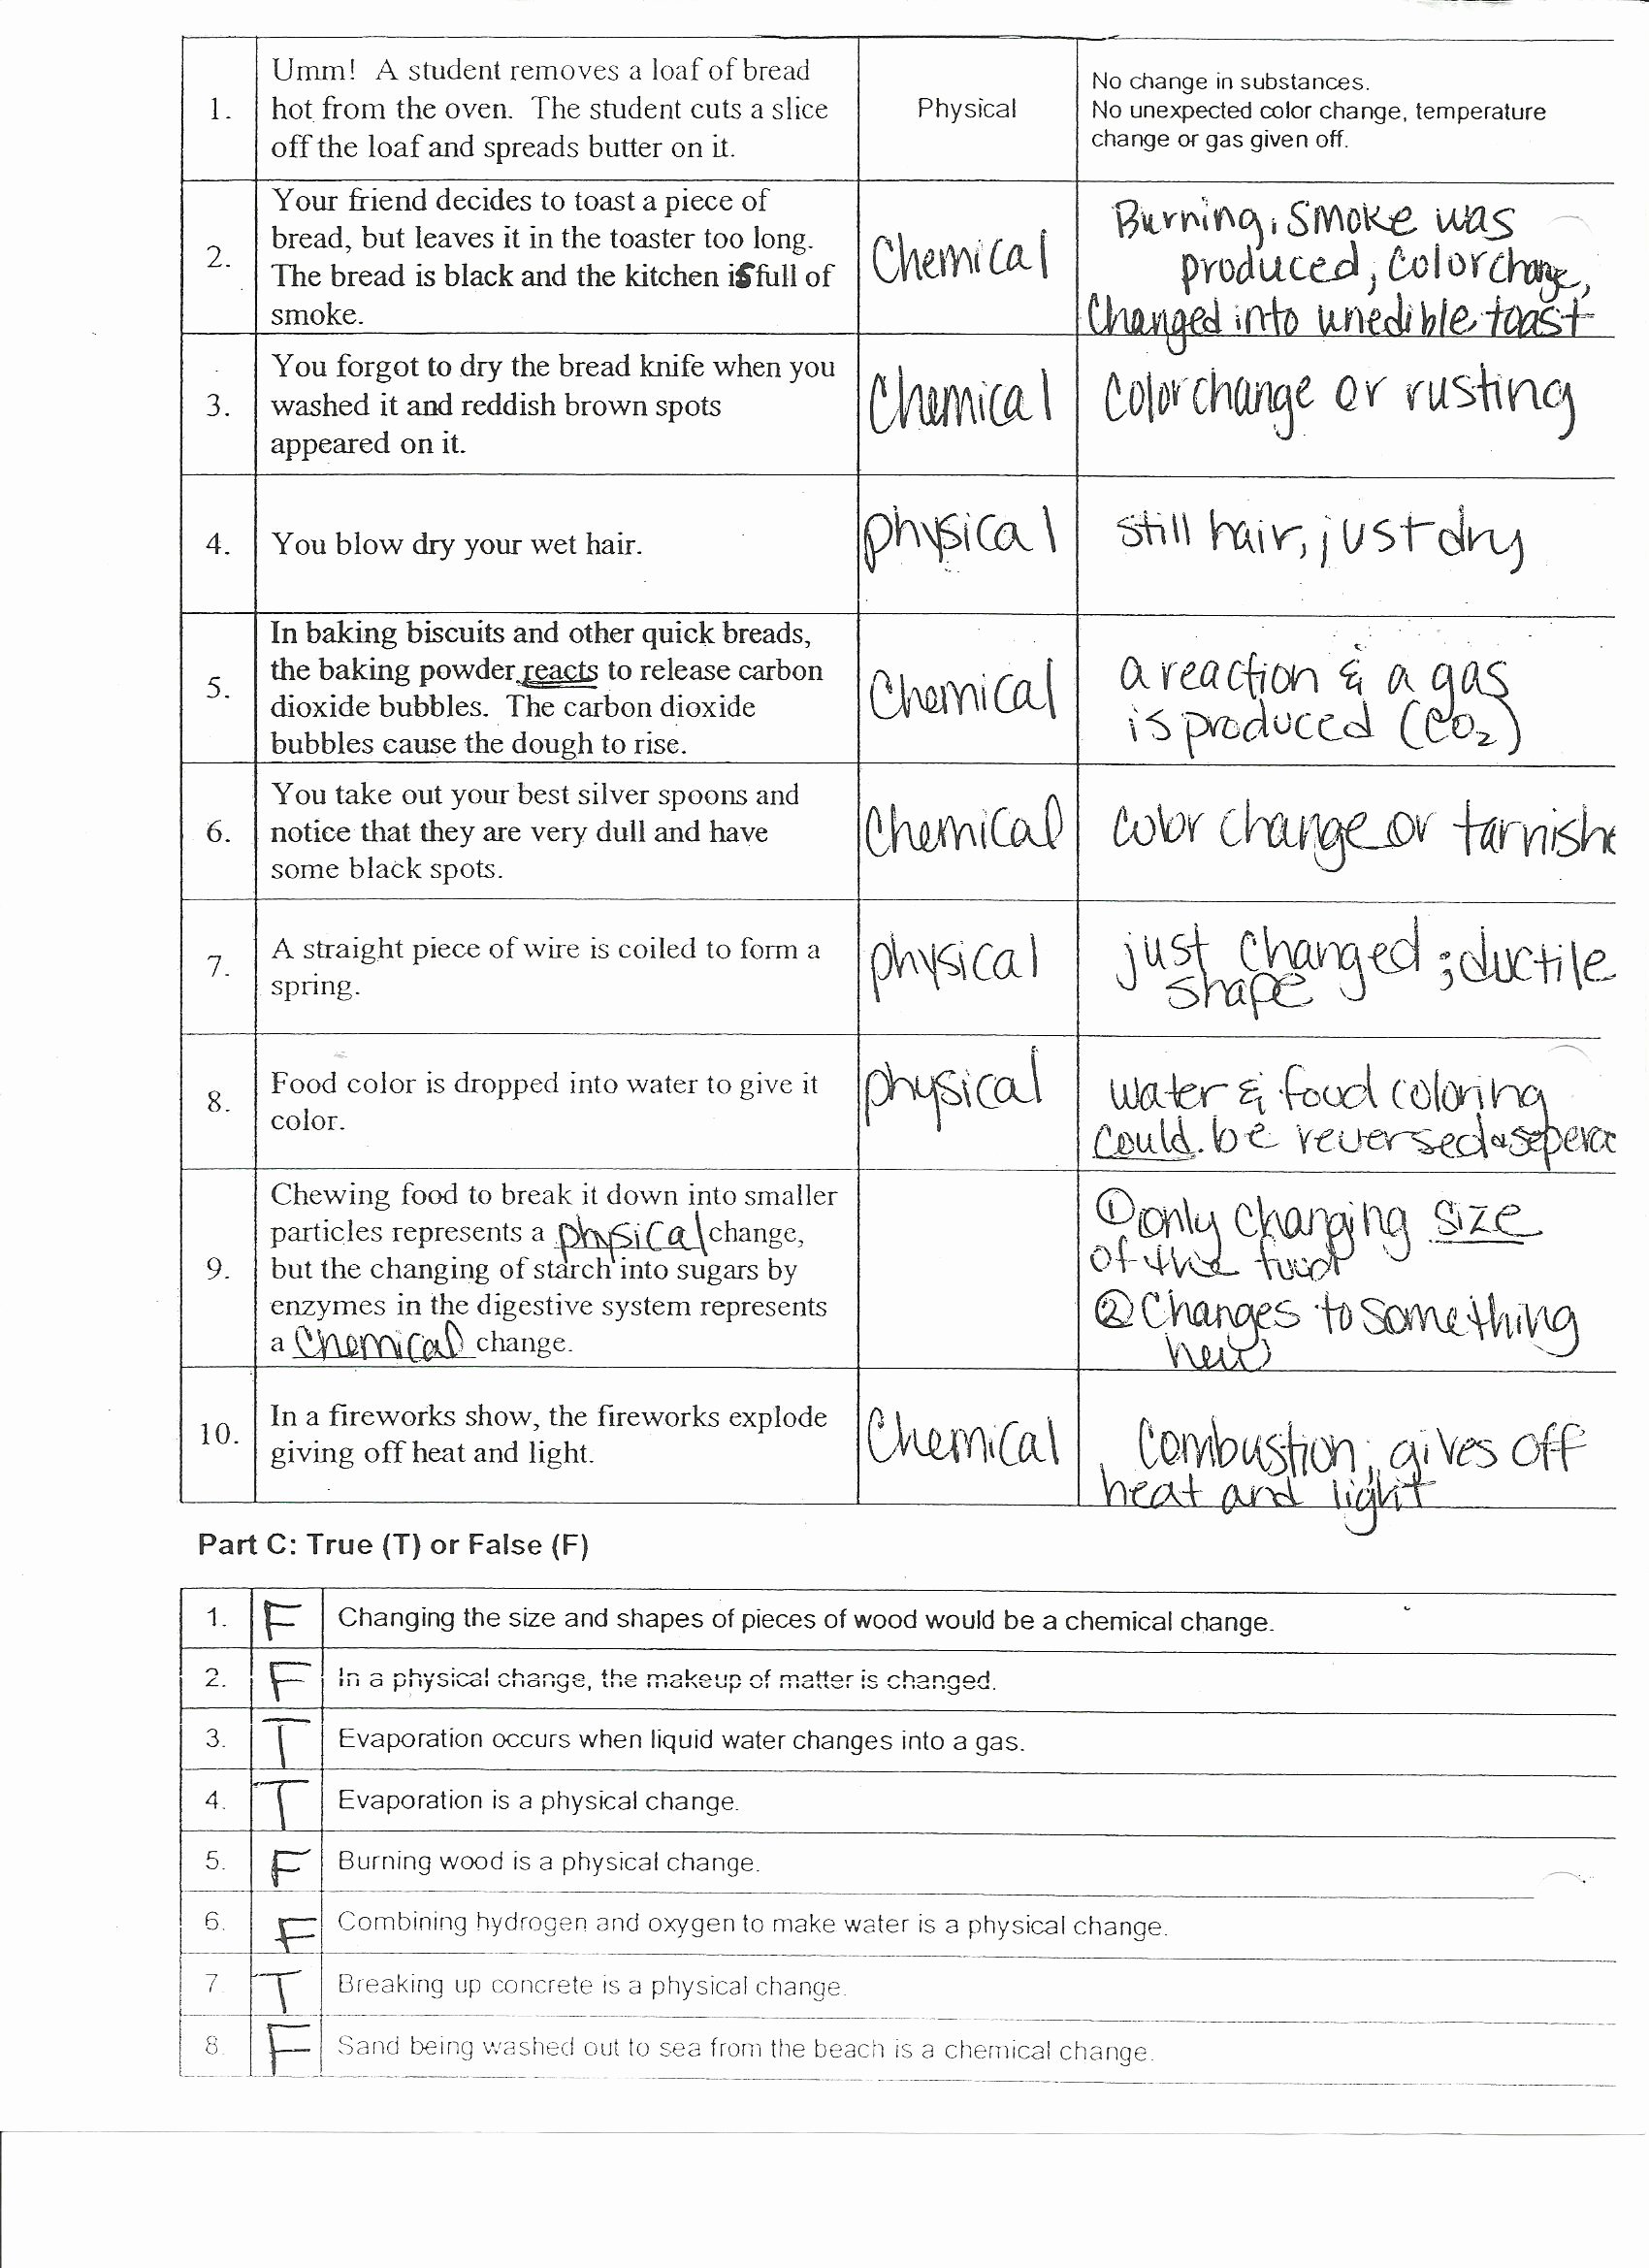 Physical and Chemical Change Worksheet Luxury 35 Chemical and Physical Changes Worksheet Physical and